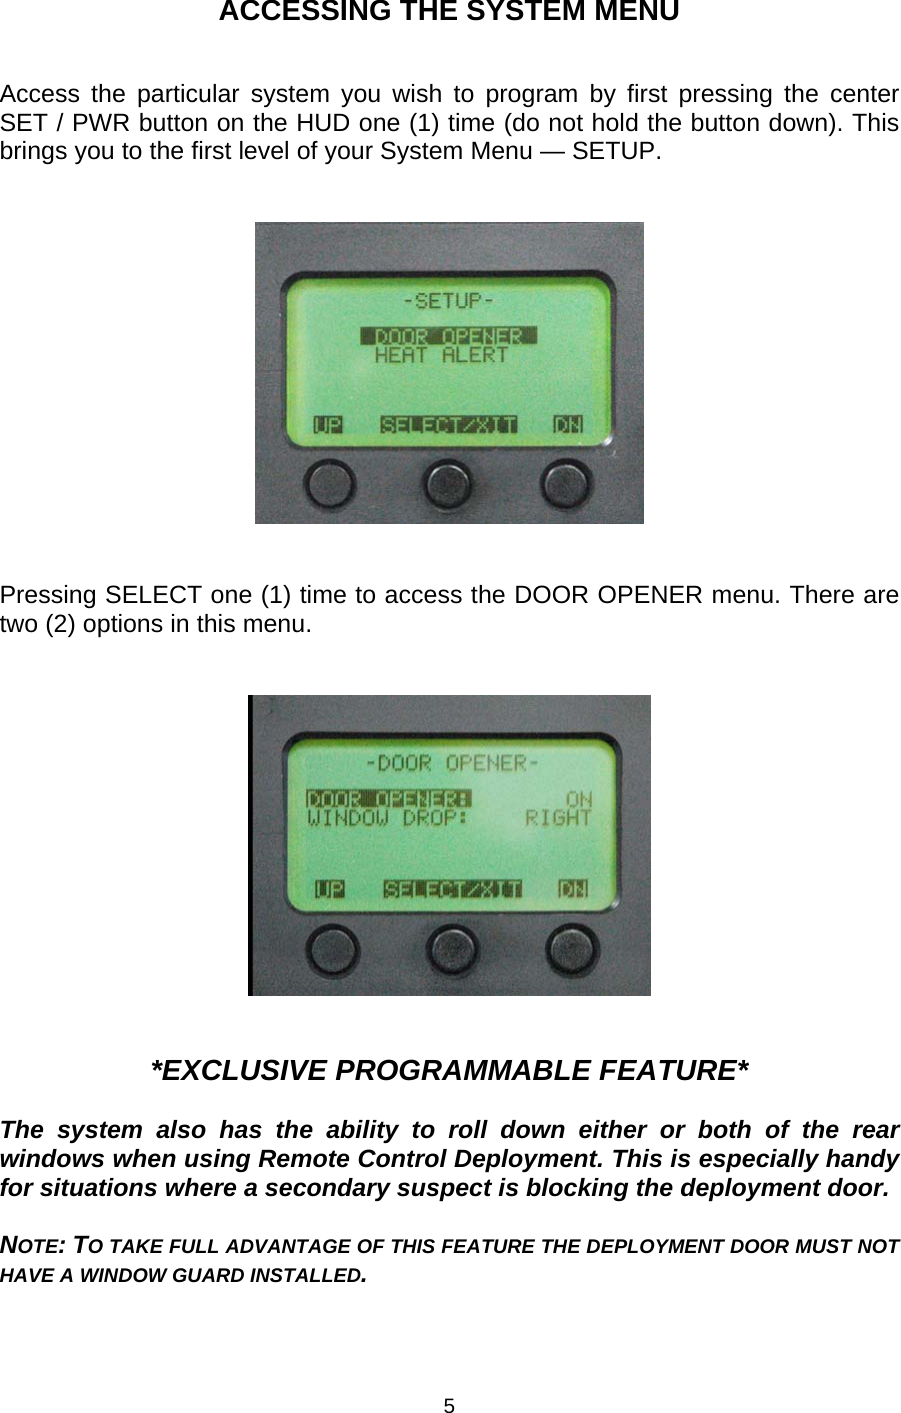 ACCESSING THE SYSTEM MENU   Access the particular system you wish to program by first pressing the center SET / PWR button on the HUD one (1) time (do not hold the button down). This brings you to the first level of your System Menu — SETUP.      Pressing SELECT one (1) time to access the DOOR OPENER menu. There are two (2) options in this menu.      *EXCLUSIVE PROGRAMMABLE FEATURE*  The system also has the ability to roll down either or both of the rear windows when using Remote Control Deployment. This is especially handy for situations where a secondary suspect is blocking the deployment door.   NOTE: TO TAKE FULL ADVANTAGE OF THIS FEATURE THE DEPLOYMENT DOOR MUST NOT HAVE A WINDOW GUARD INSTALLED. 5 